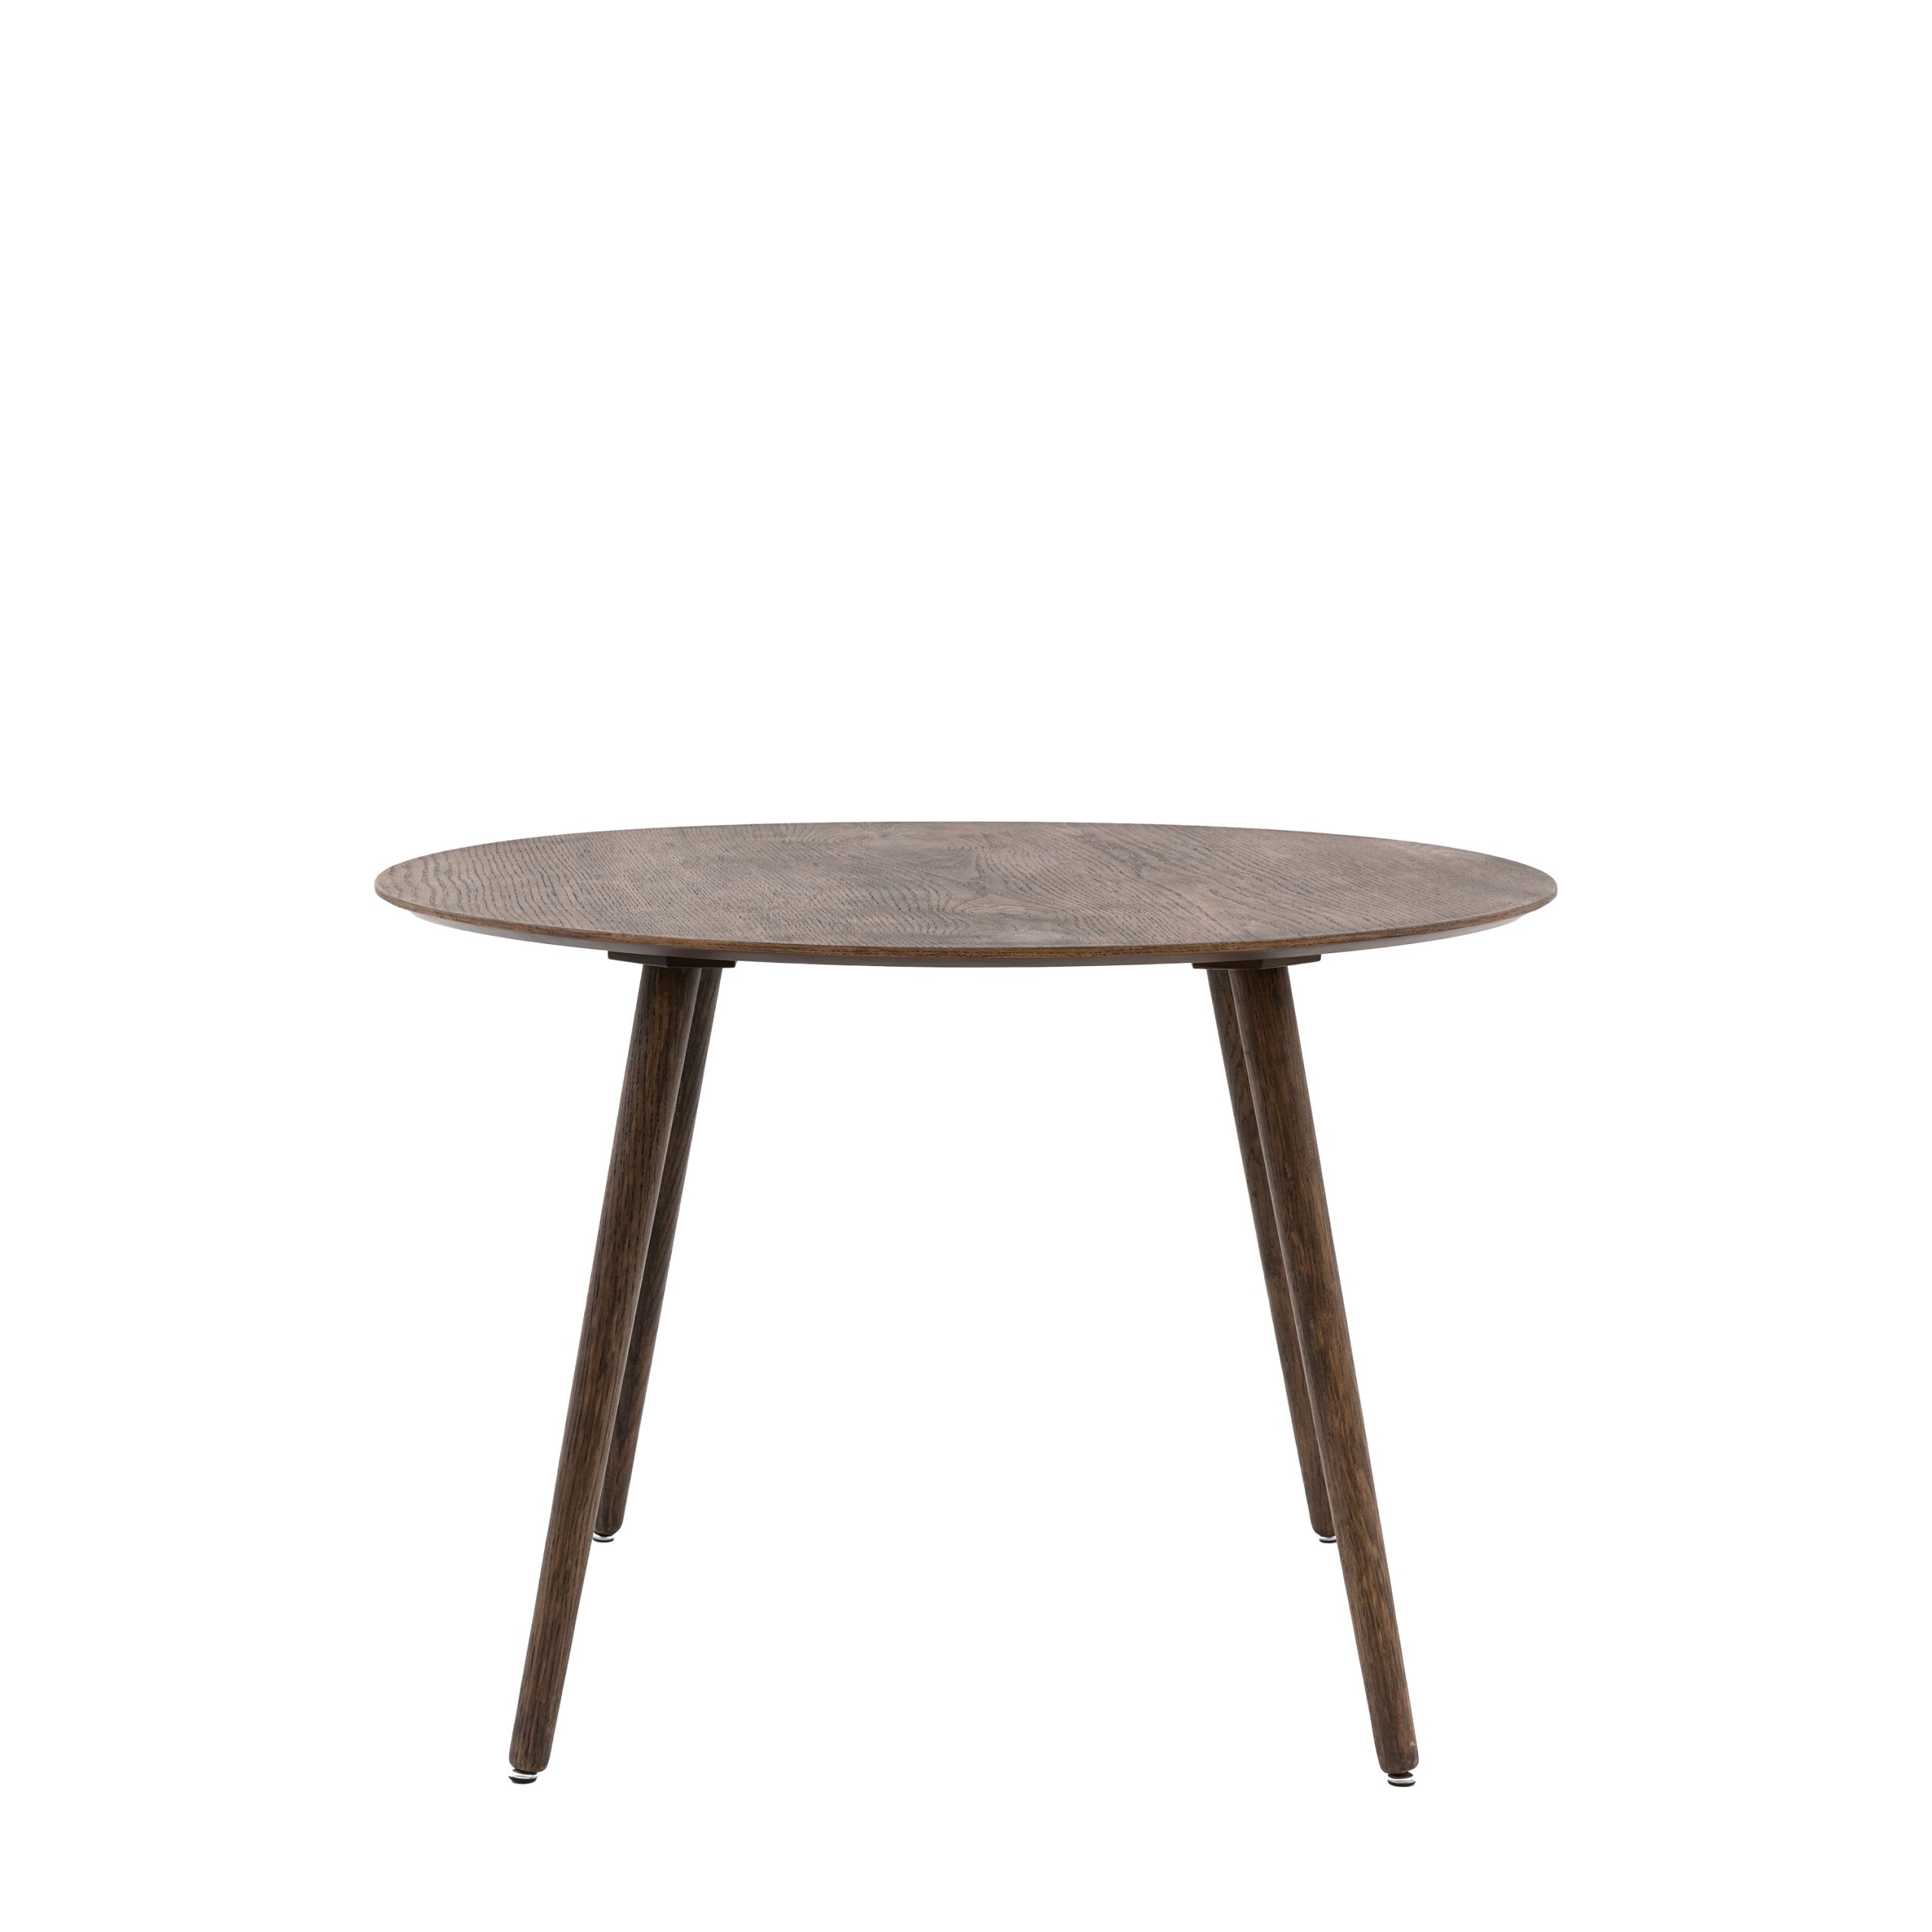 Gallery Direct Hatfield Round Dining Table Smoked